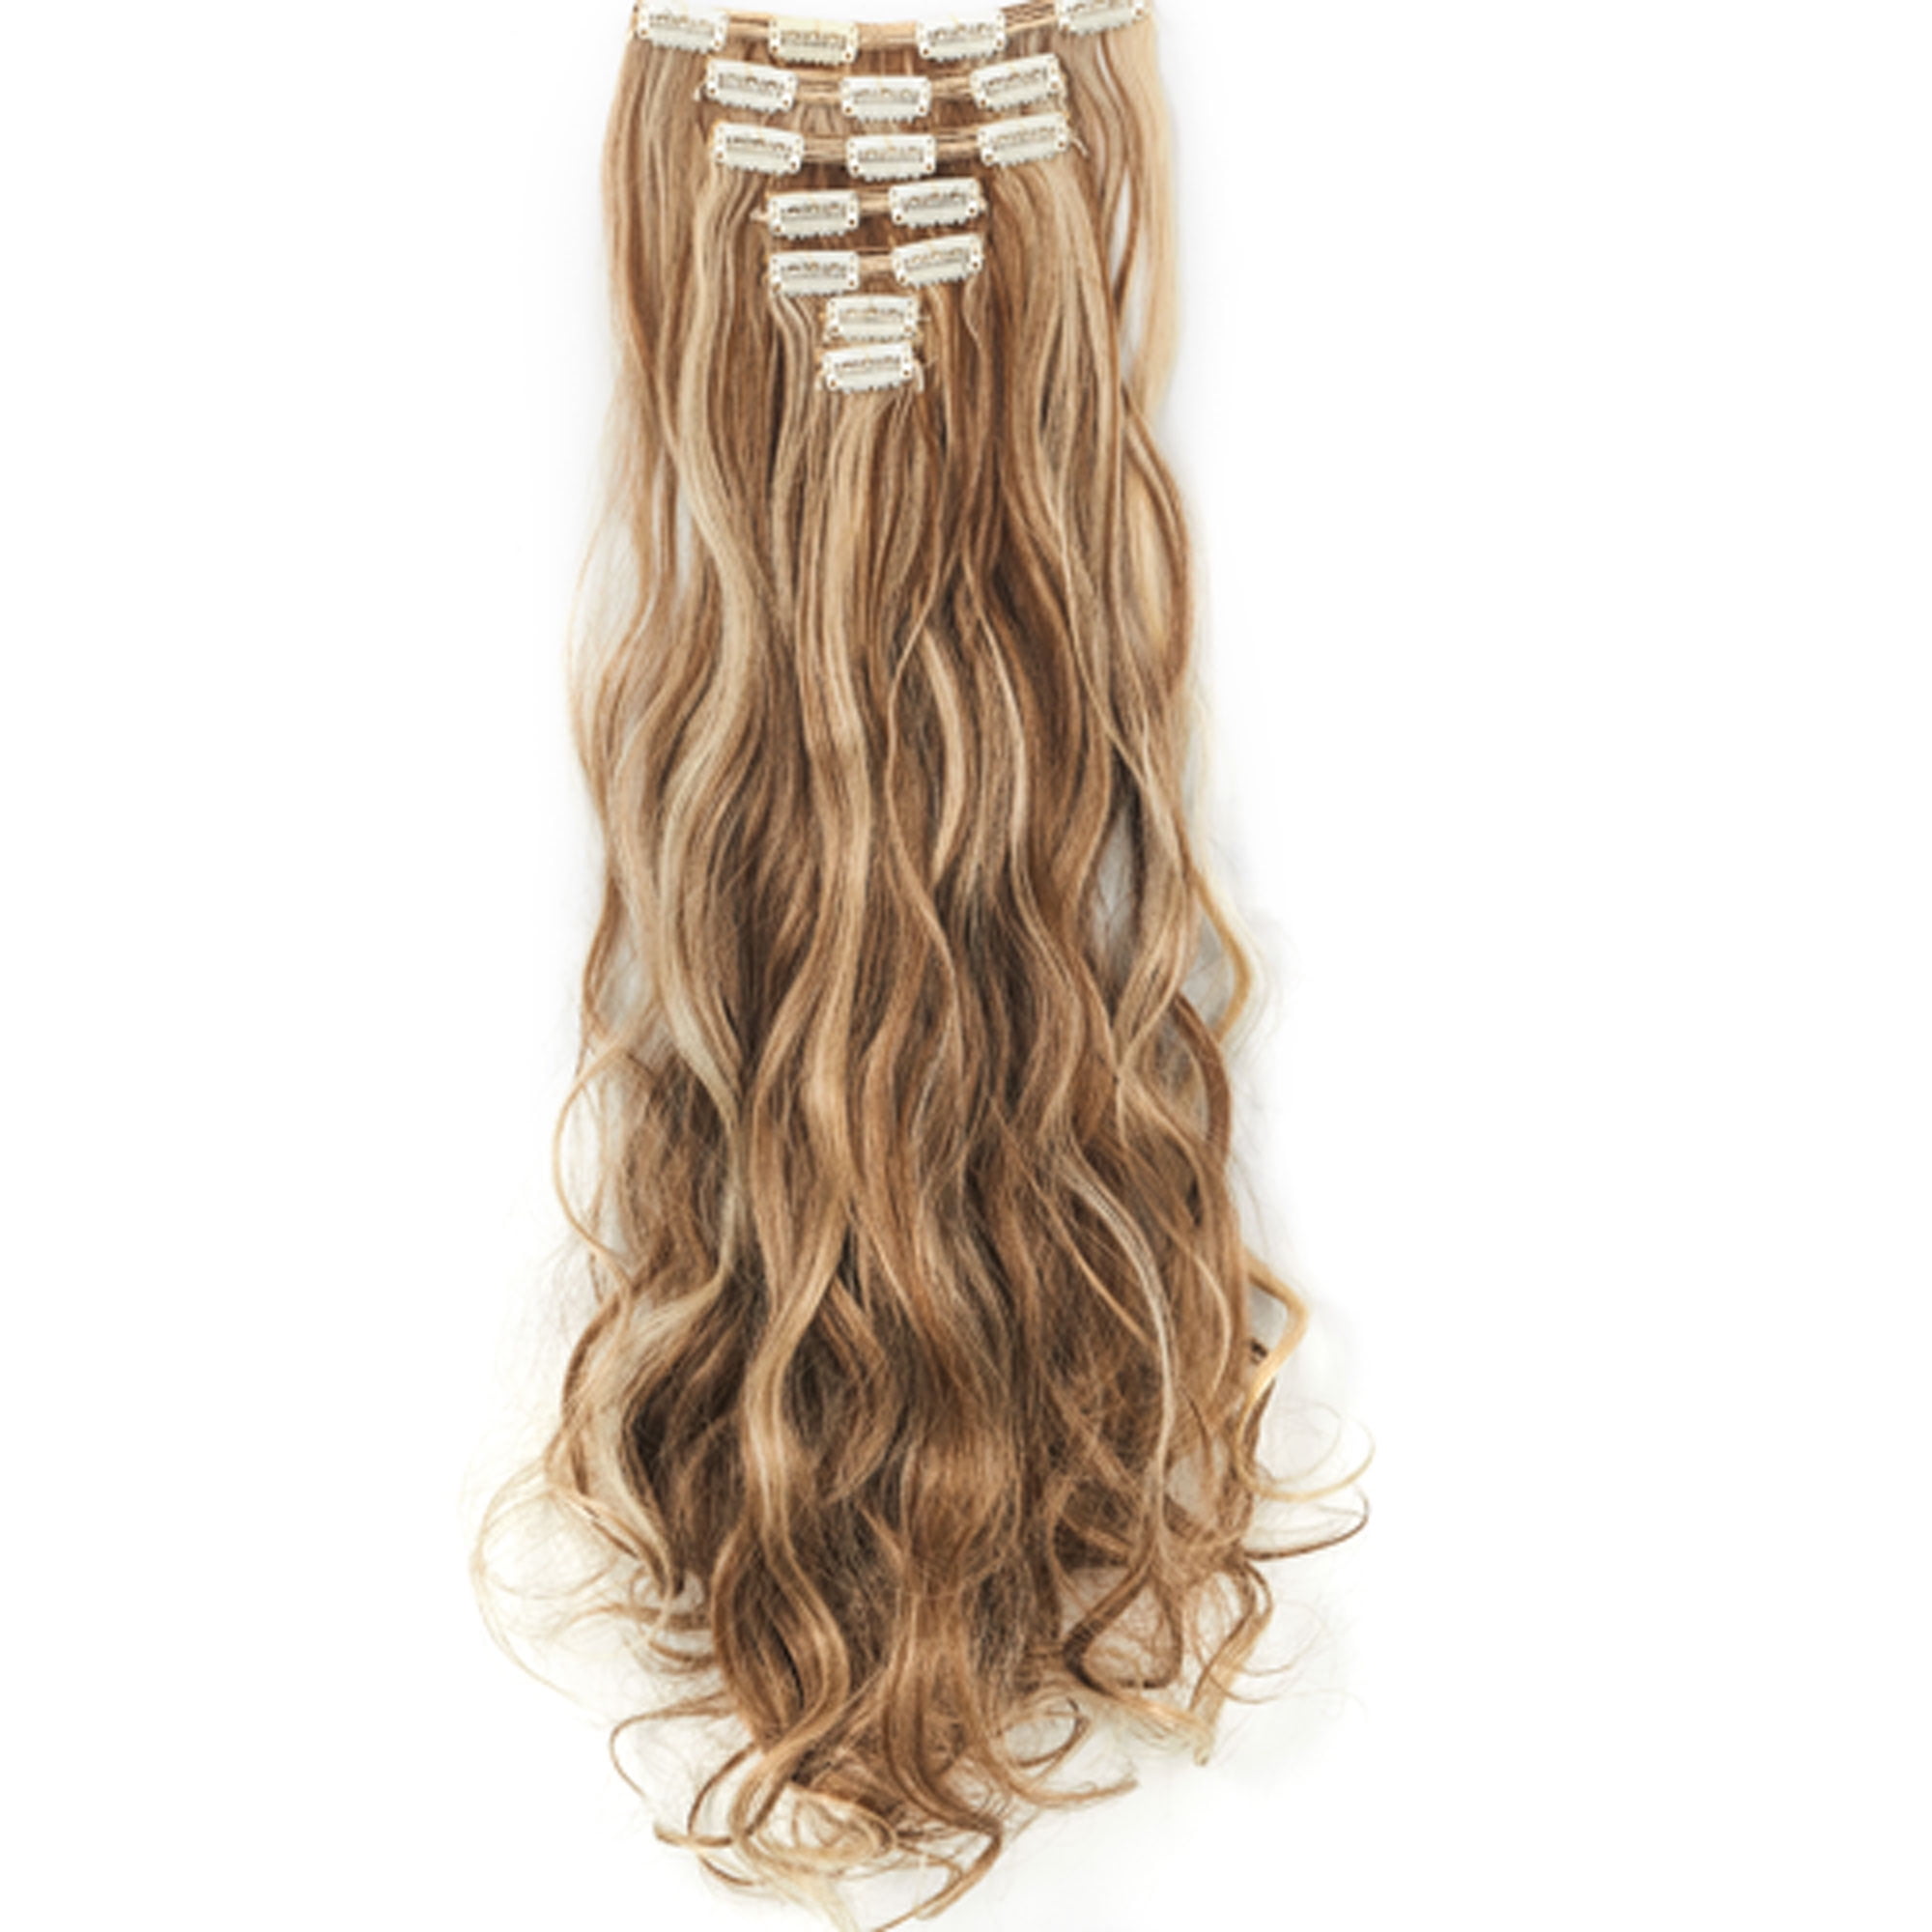 Lelinta 24 Women Double Long Curly Hair In Hair Extensions 7 Pieces 16